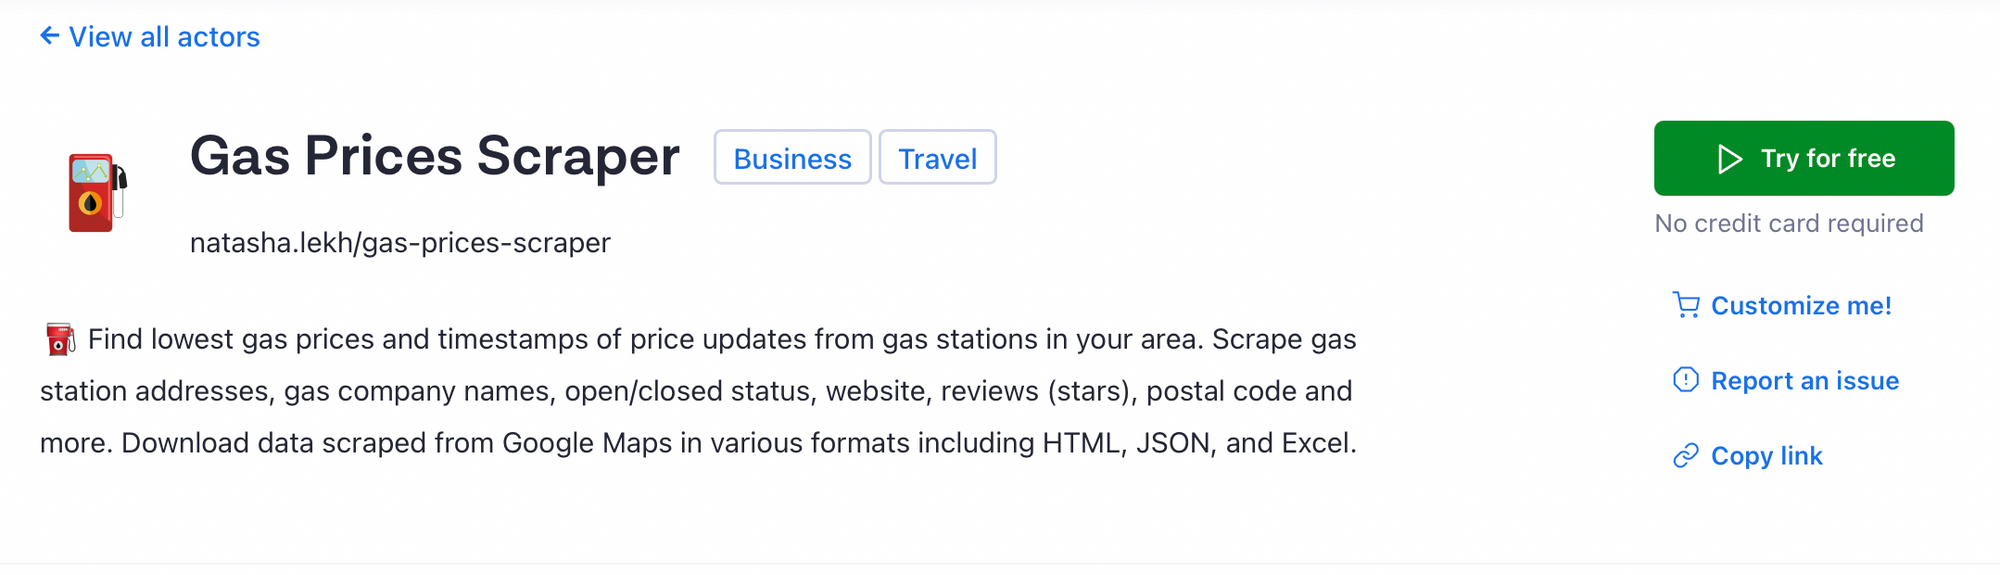 Step 1. Go to Gas Prices Scraper on Apify Store and click Try for free